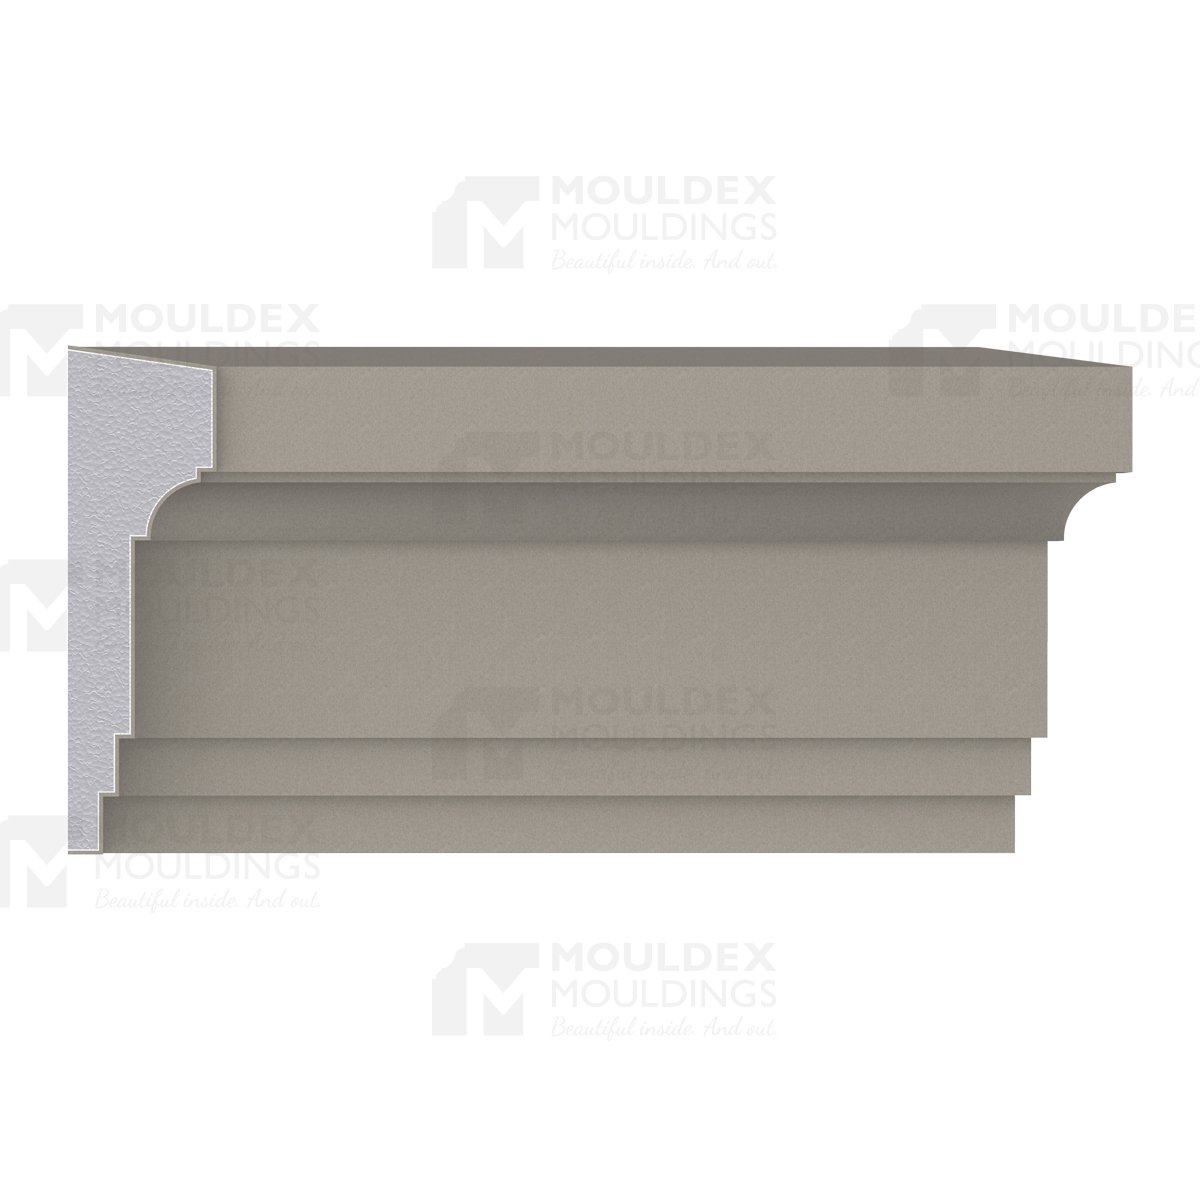 The Vanessa Composite Exterior Middle Band Moulding